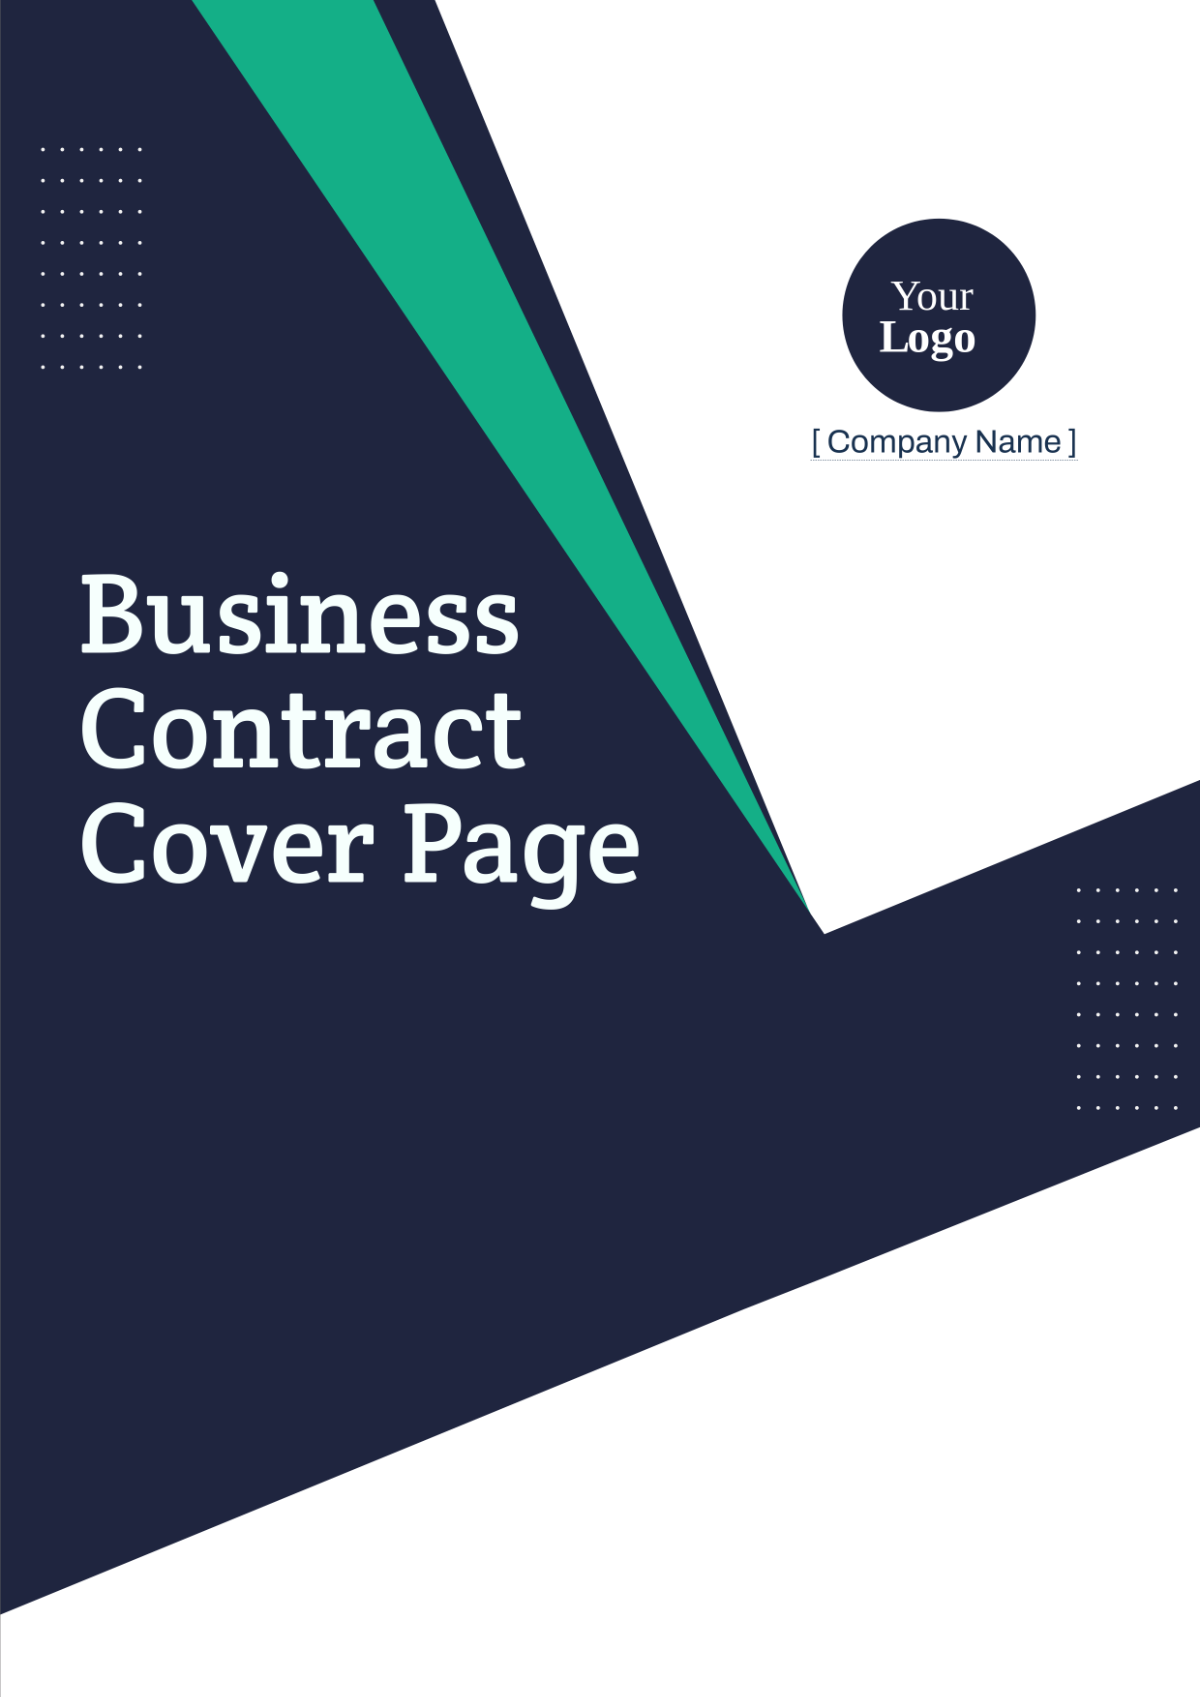 Business Contract Cover Page Template